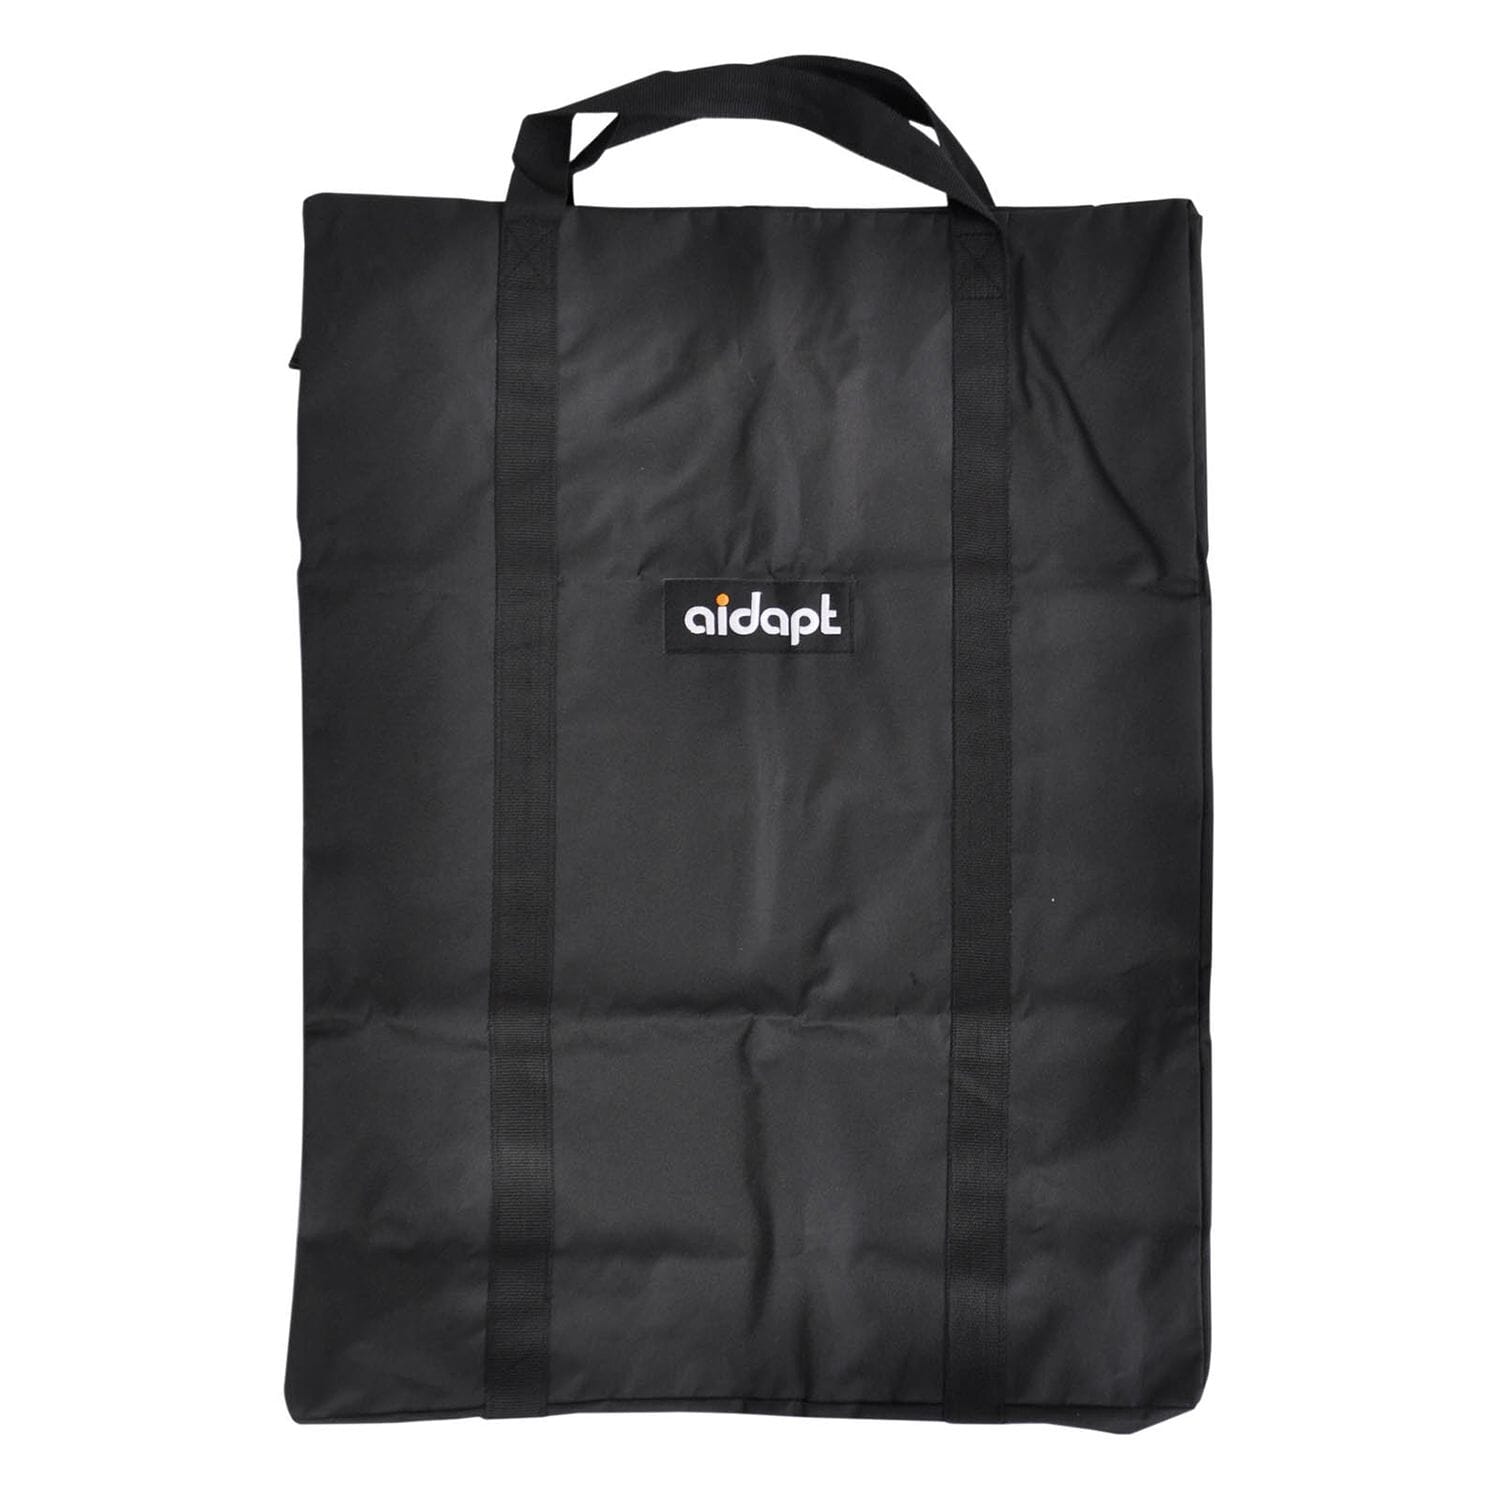 View Aidapt Wheelchair Carry Bag information